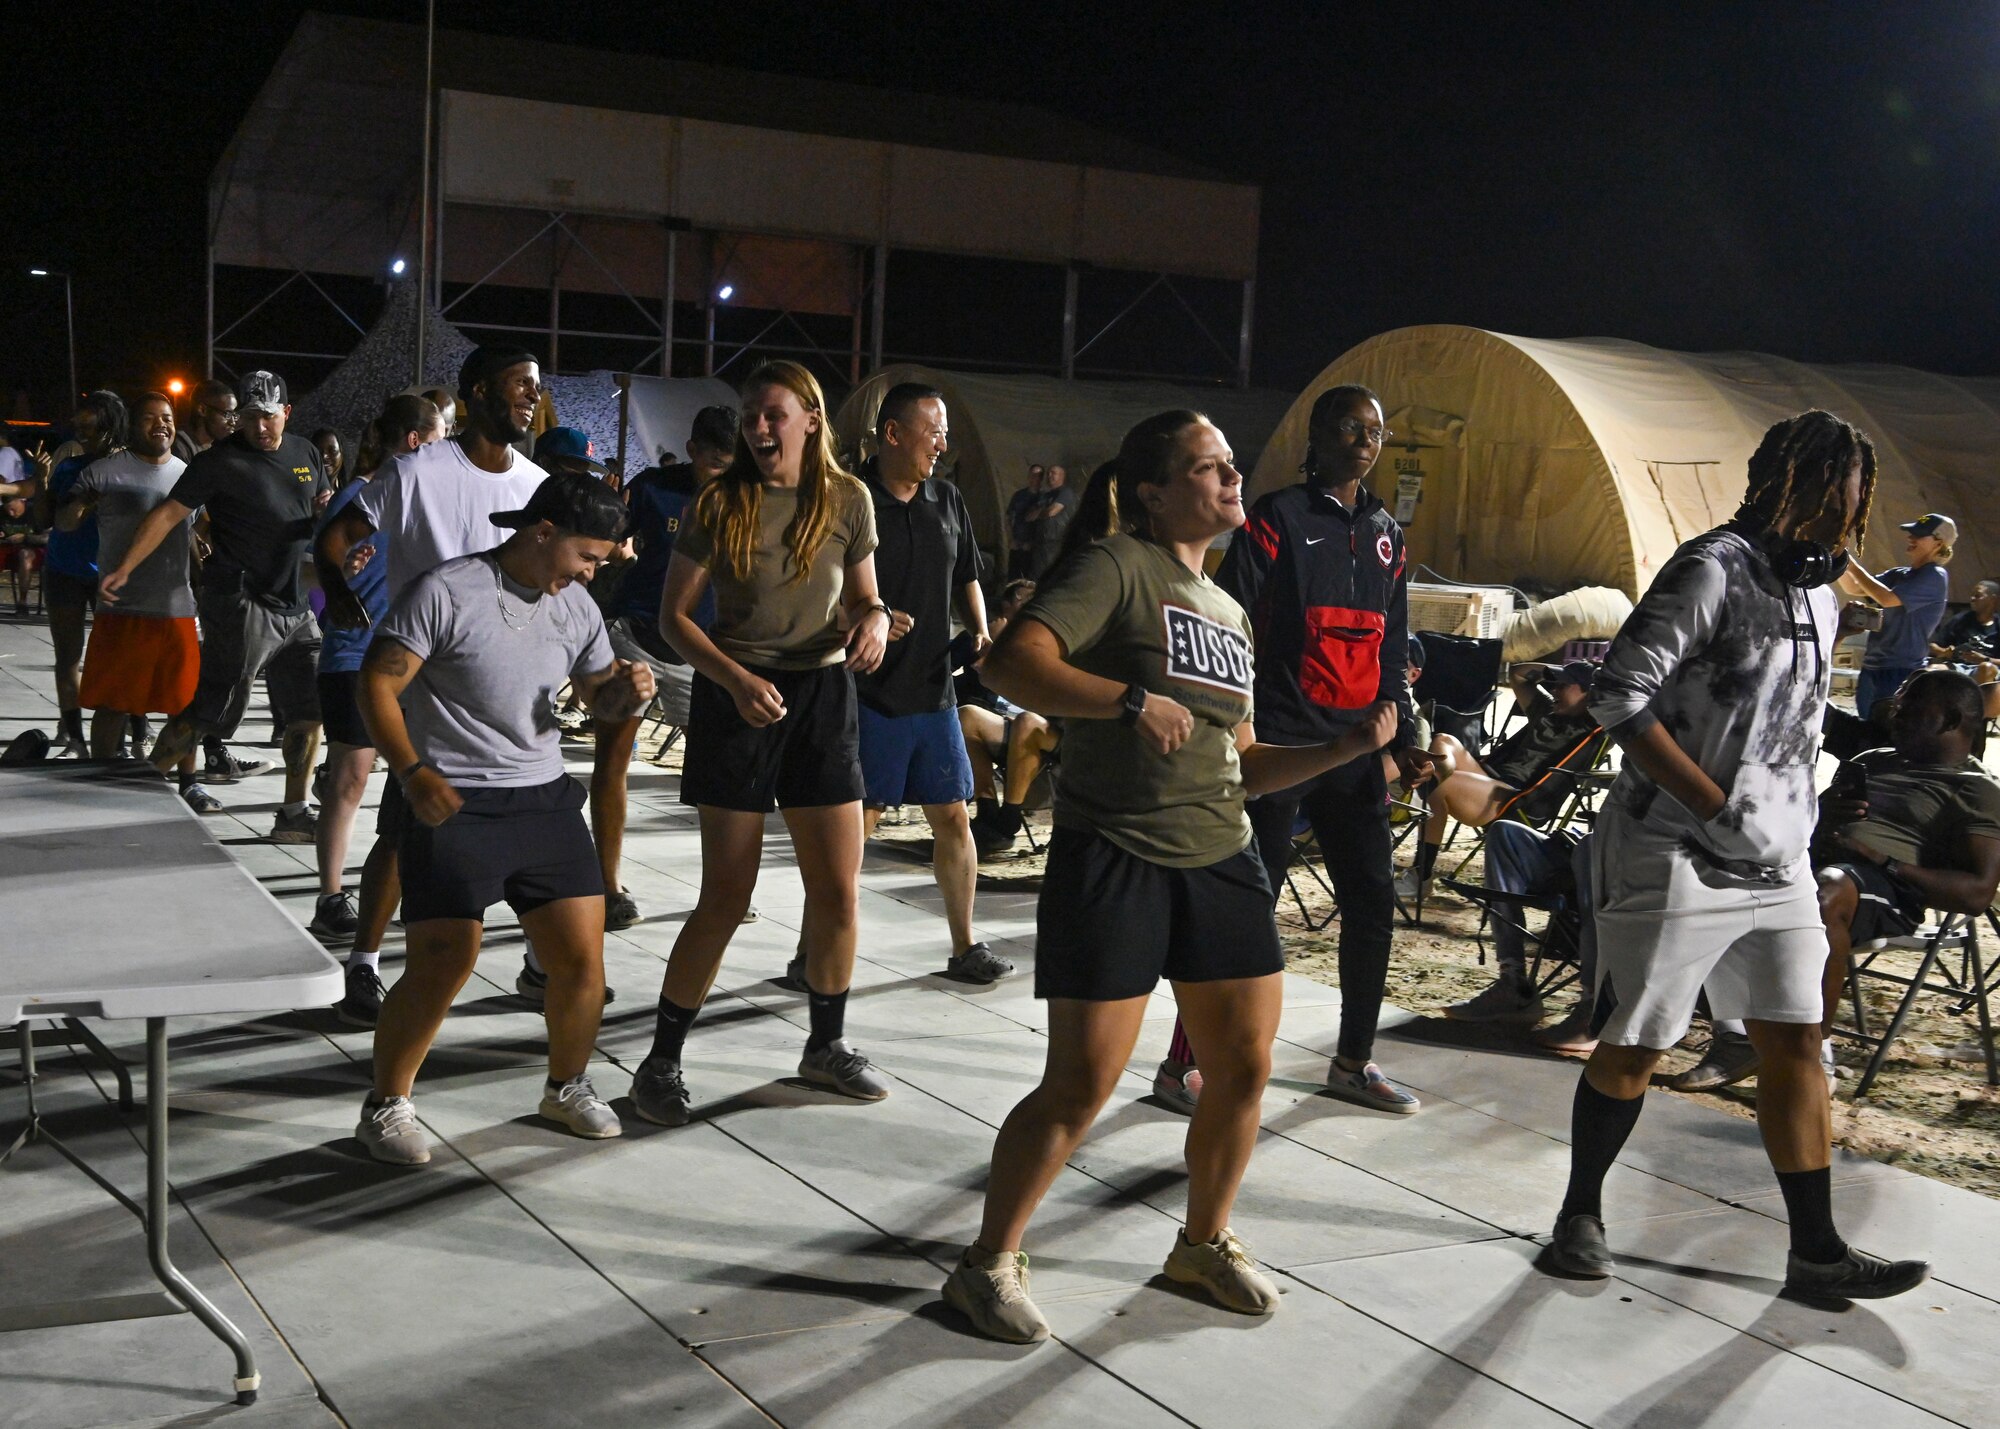 Personnel deployed to Prince Sultan Air Base line-dance during a DJ set performed by U.S. Air Force Tech. Sgt. Kelcey McDonald, U.S. Air Forces Central Band audio engineer, during a concert at PSAB, Kingdom of Saudi Arabia, Oct. 16, 2021. The 378th Air Expeditionary Wing hosted two nights of performances in recognition and celebration of the base’s accomplishments throughout the past summer. (U.S. Air Force photo by Capt. Rachel Buitrago)